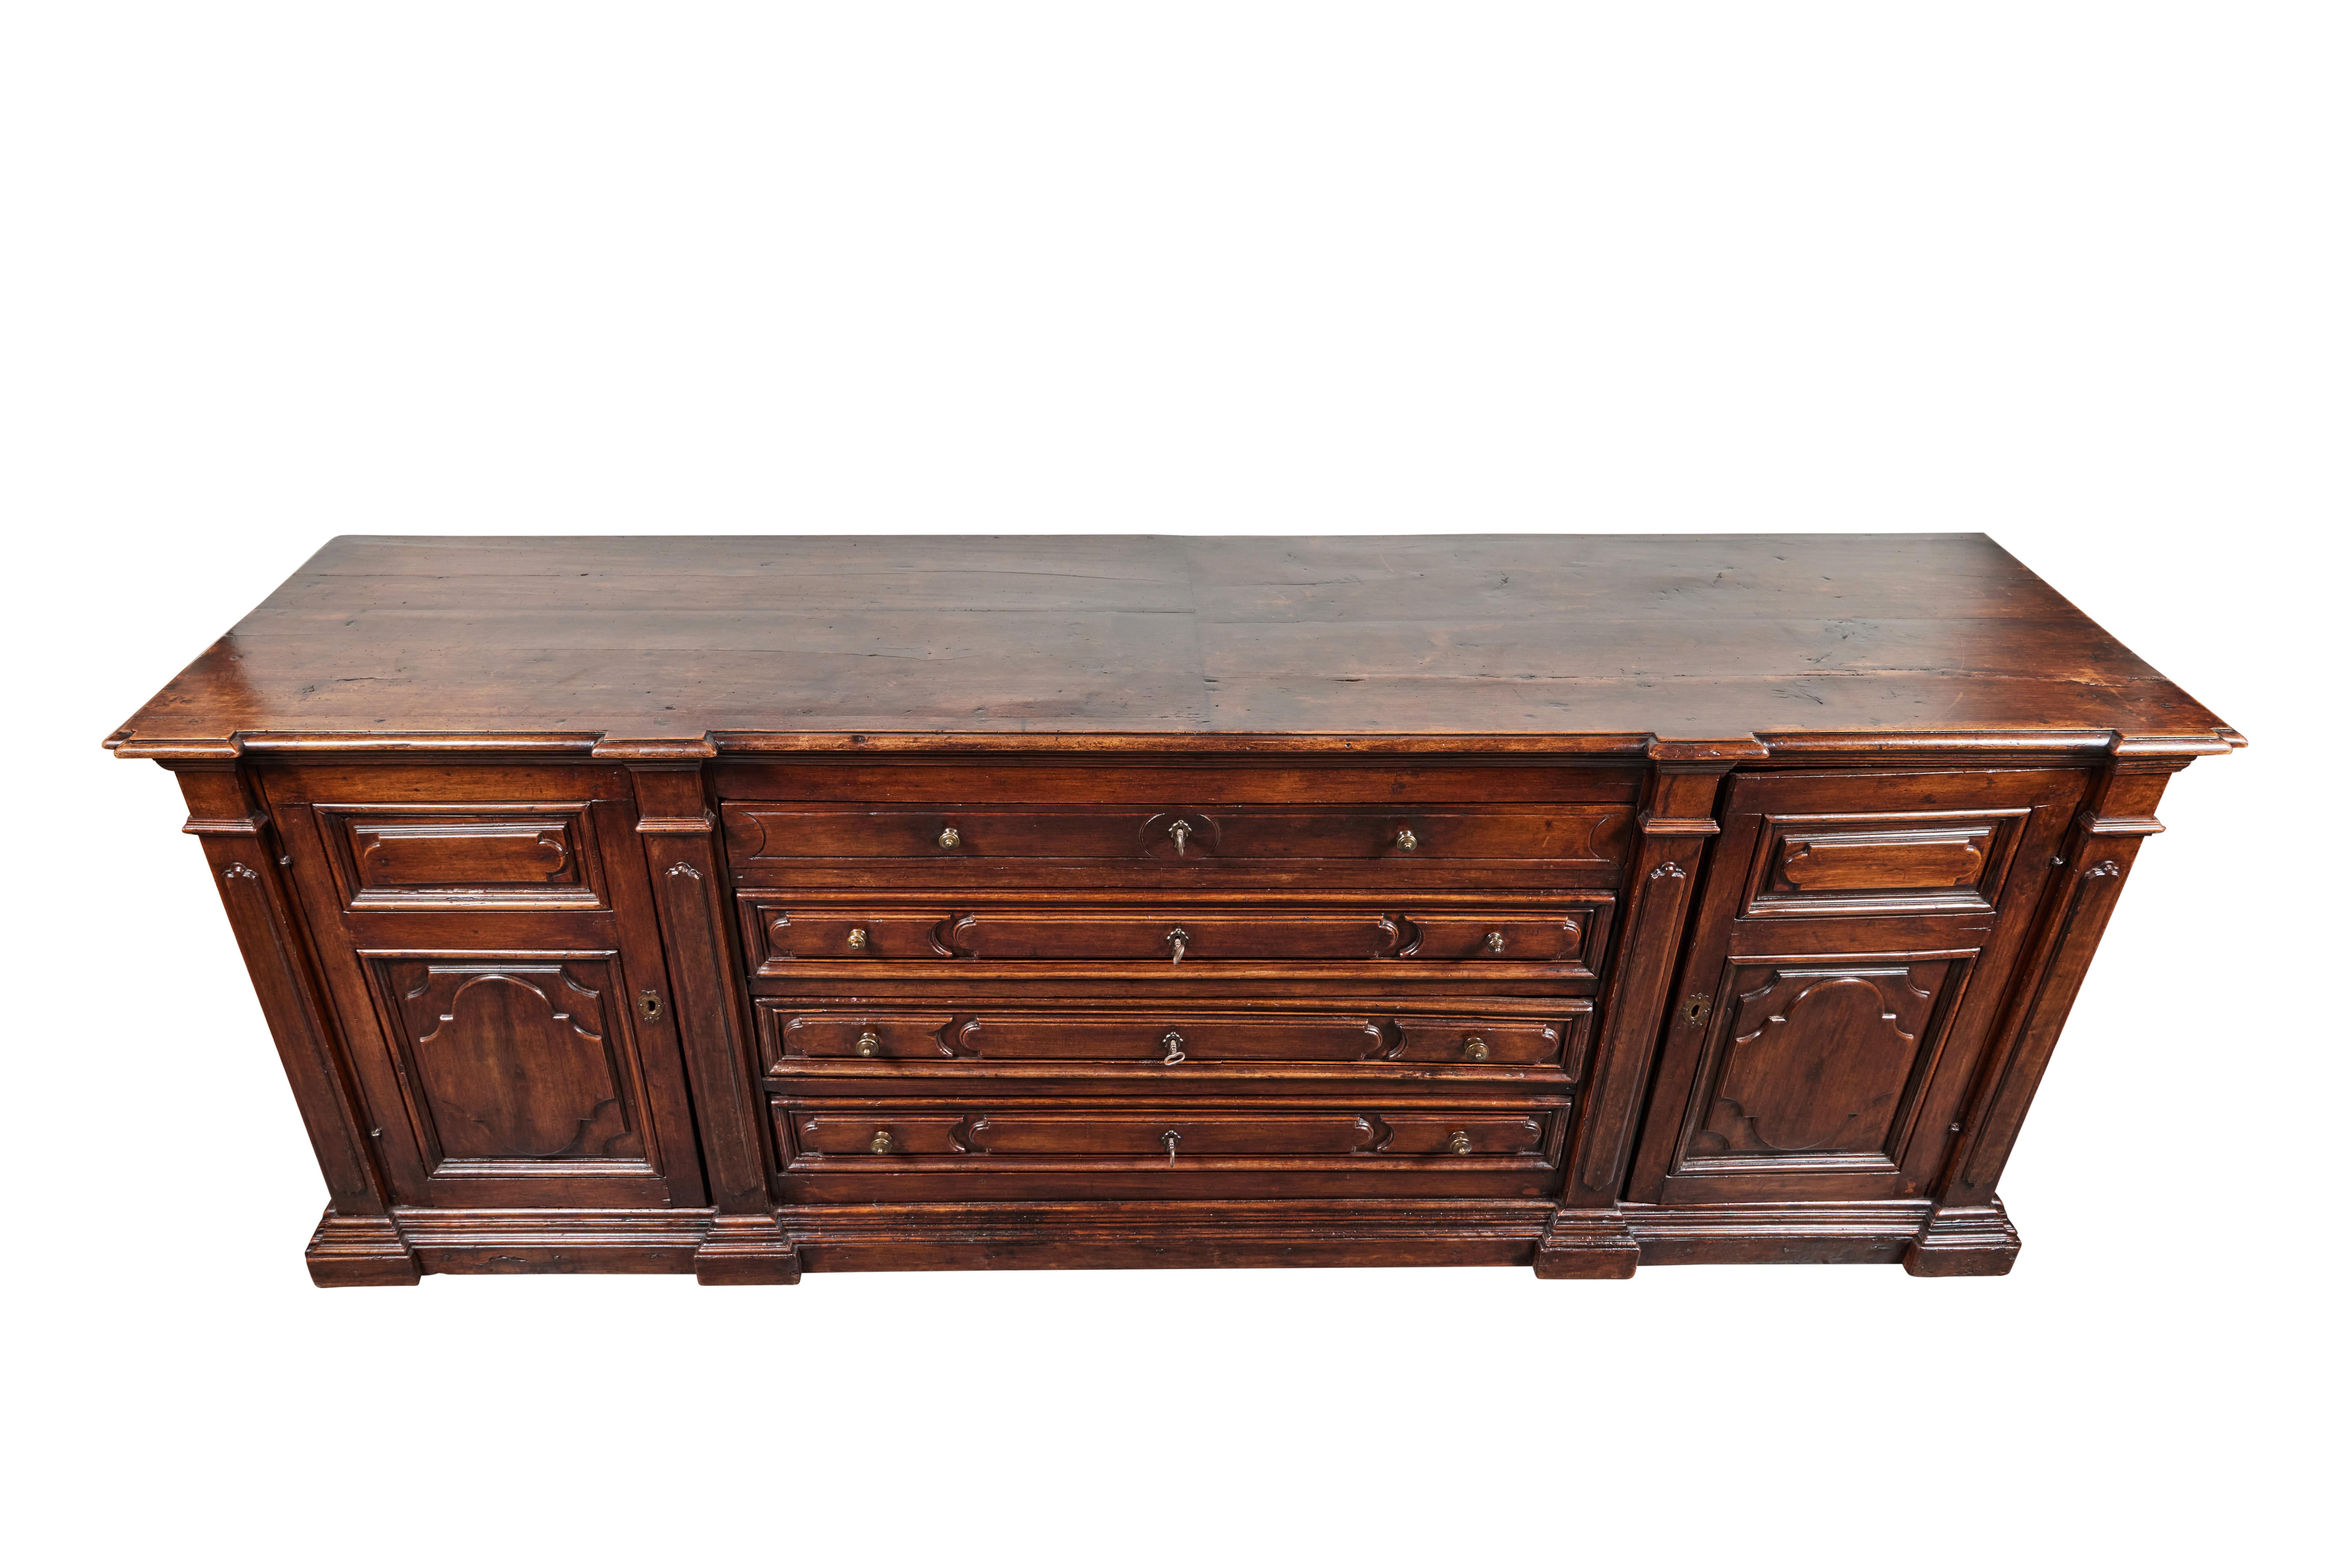 A c. 1870, solid walnut, Italian, hand-carved credenza with relief raised panels throughout. The four central drawers flanked by drawers and bracketed by faux pilasters. The whole on a stepped base.